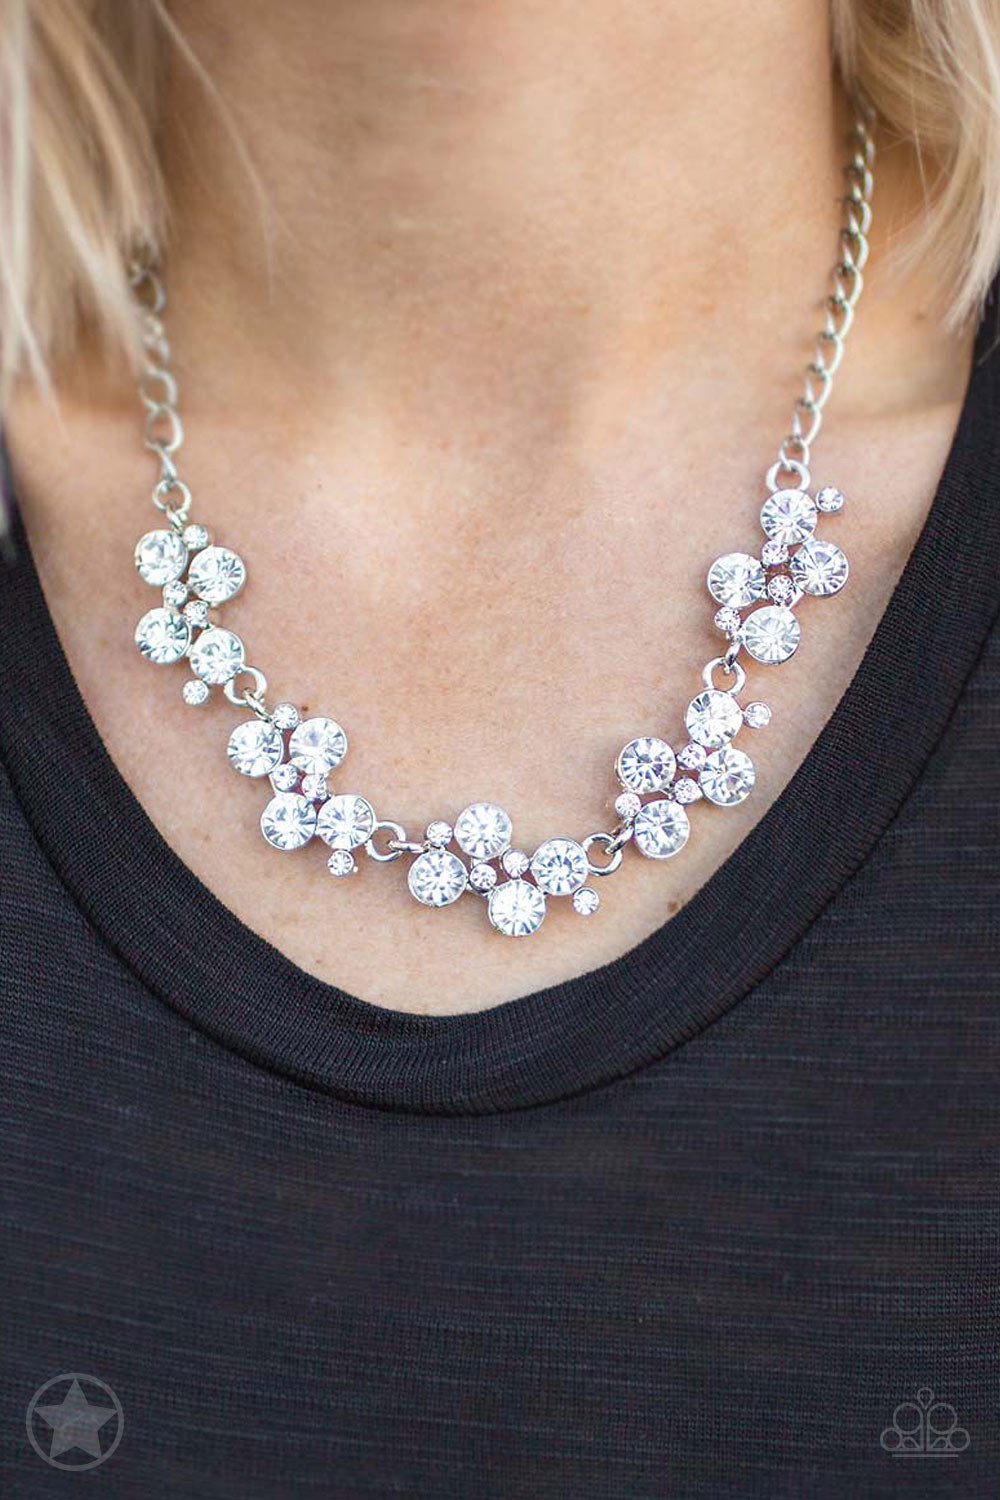 The More The Modest - White Pearl Necklace - Chic Jewelry Boutique